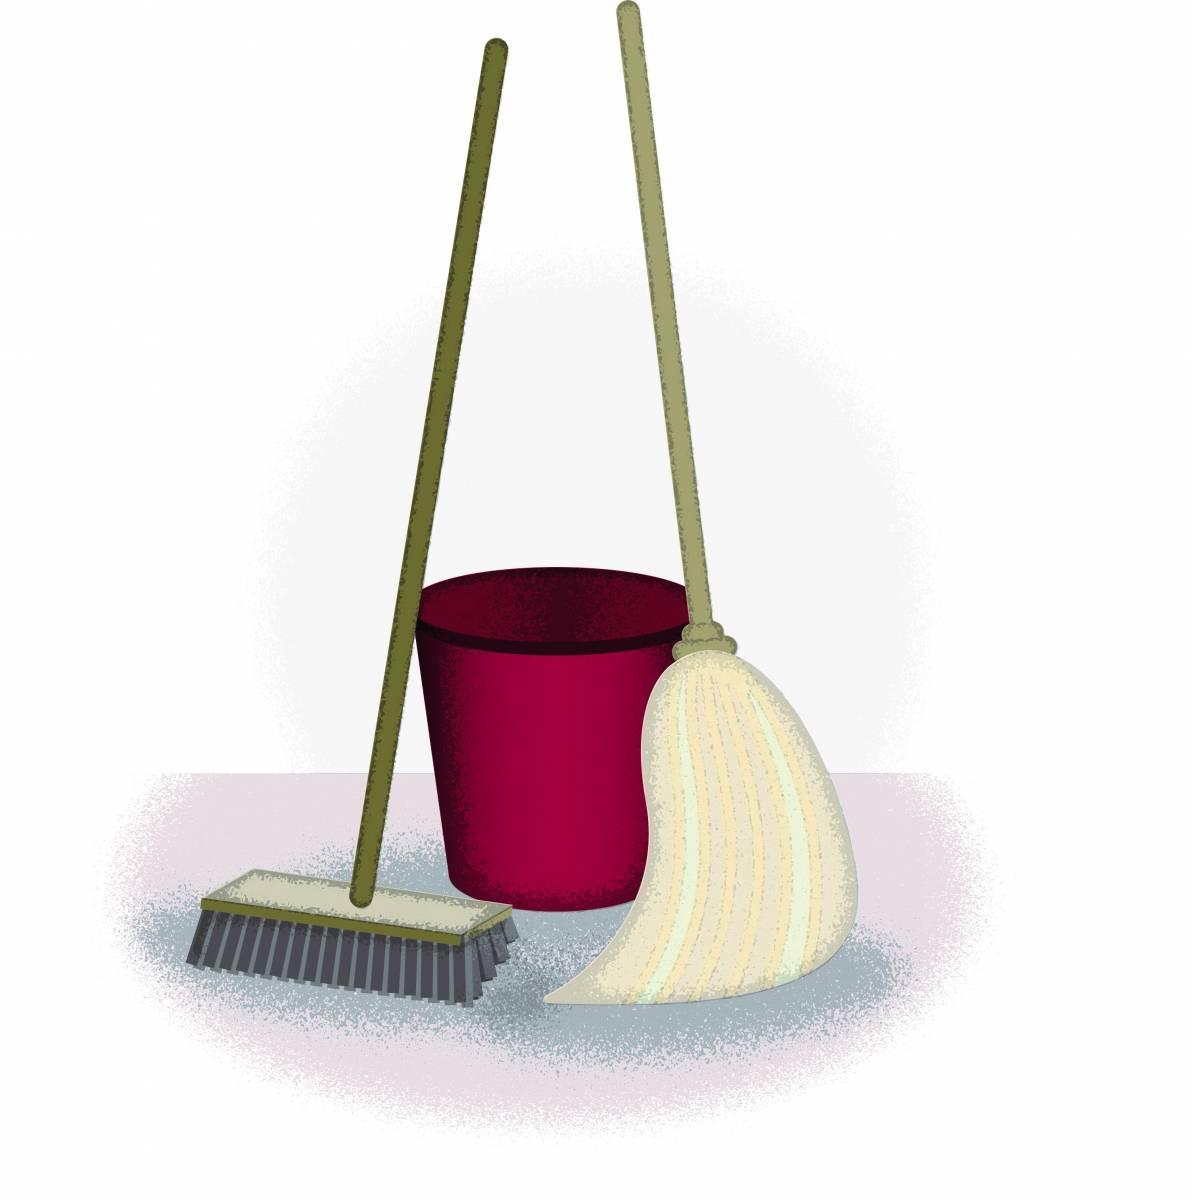 illustration of a mop, broom, and bucket